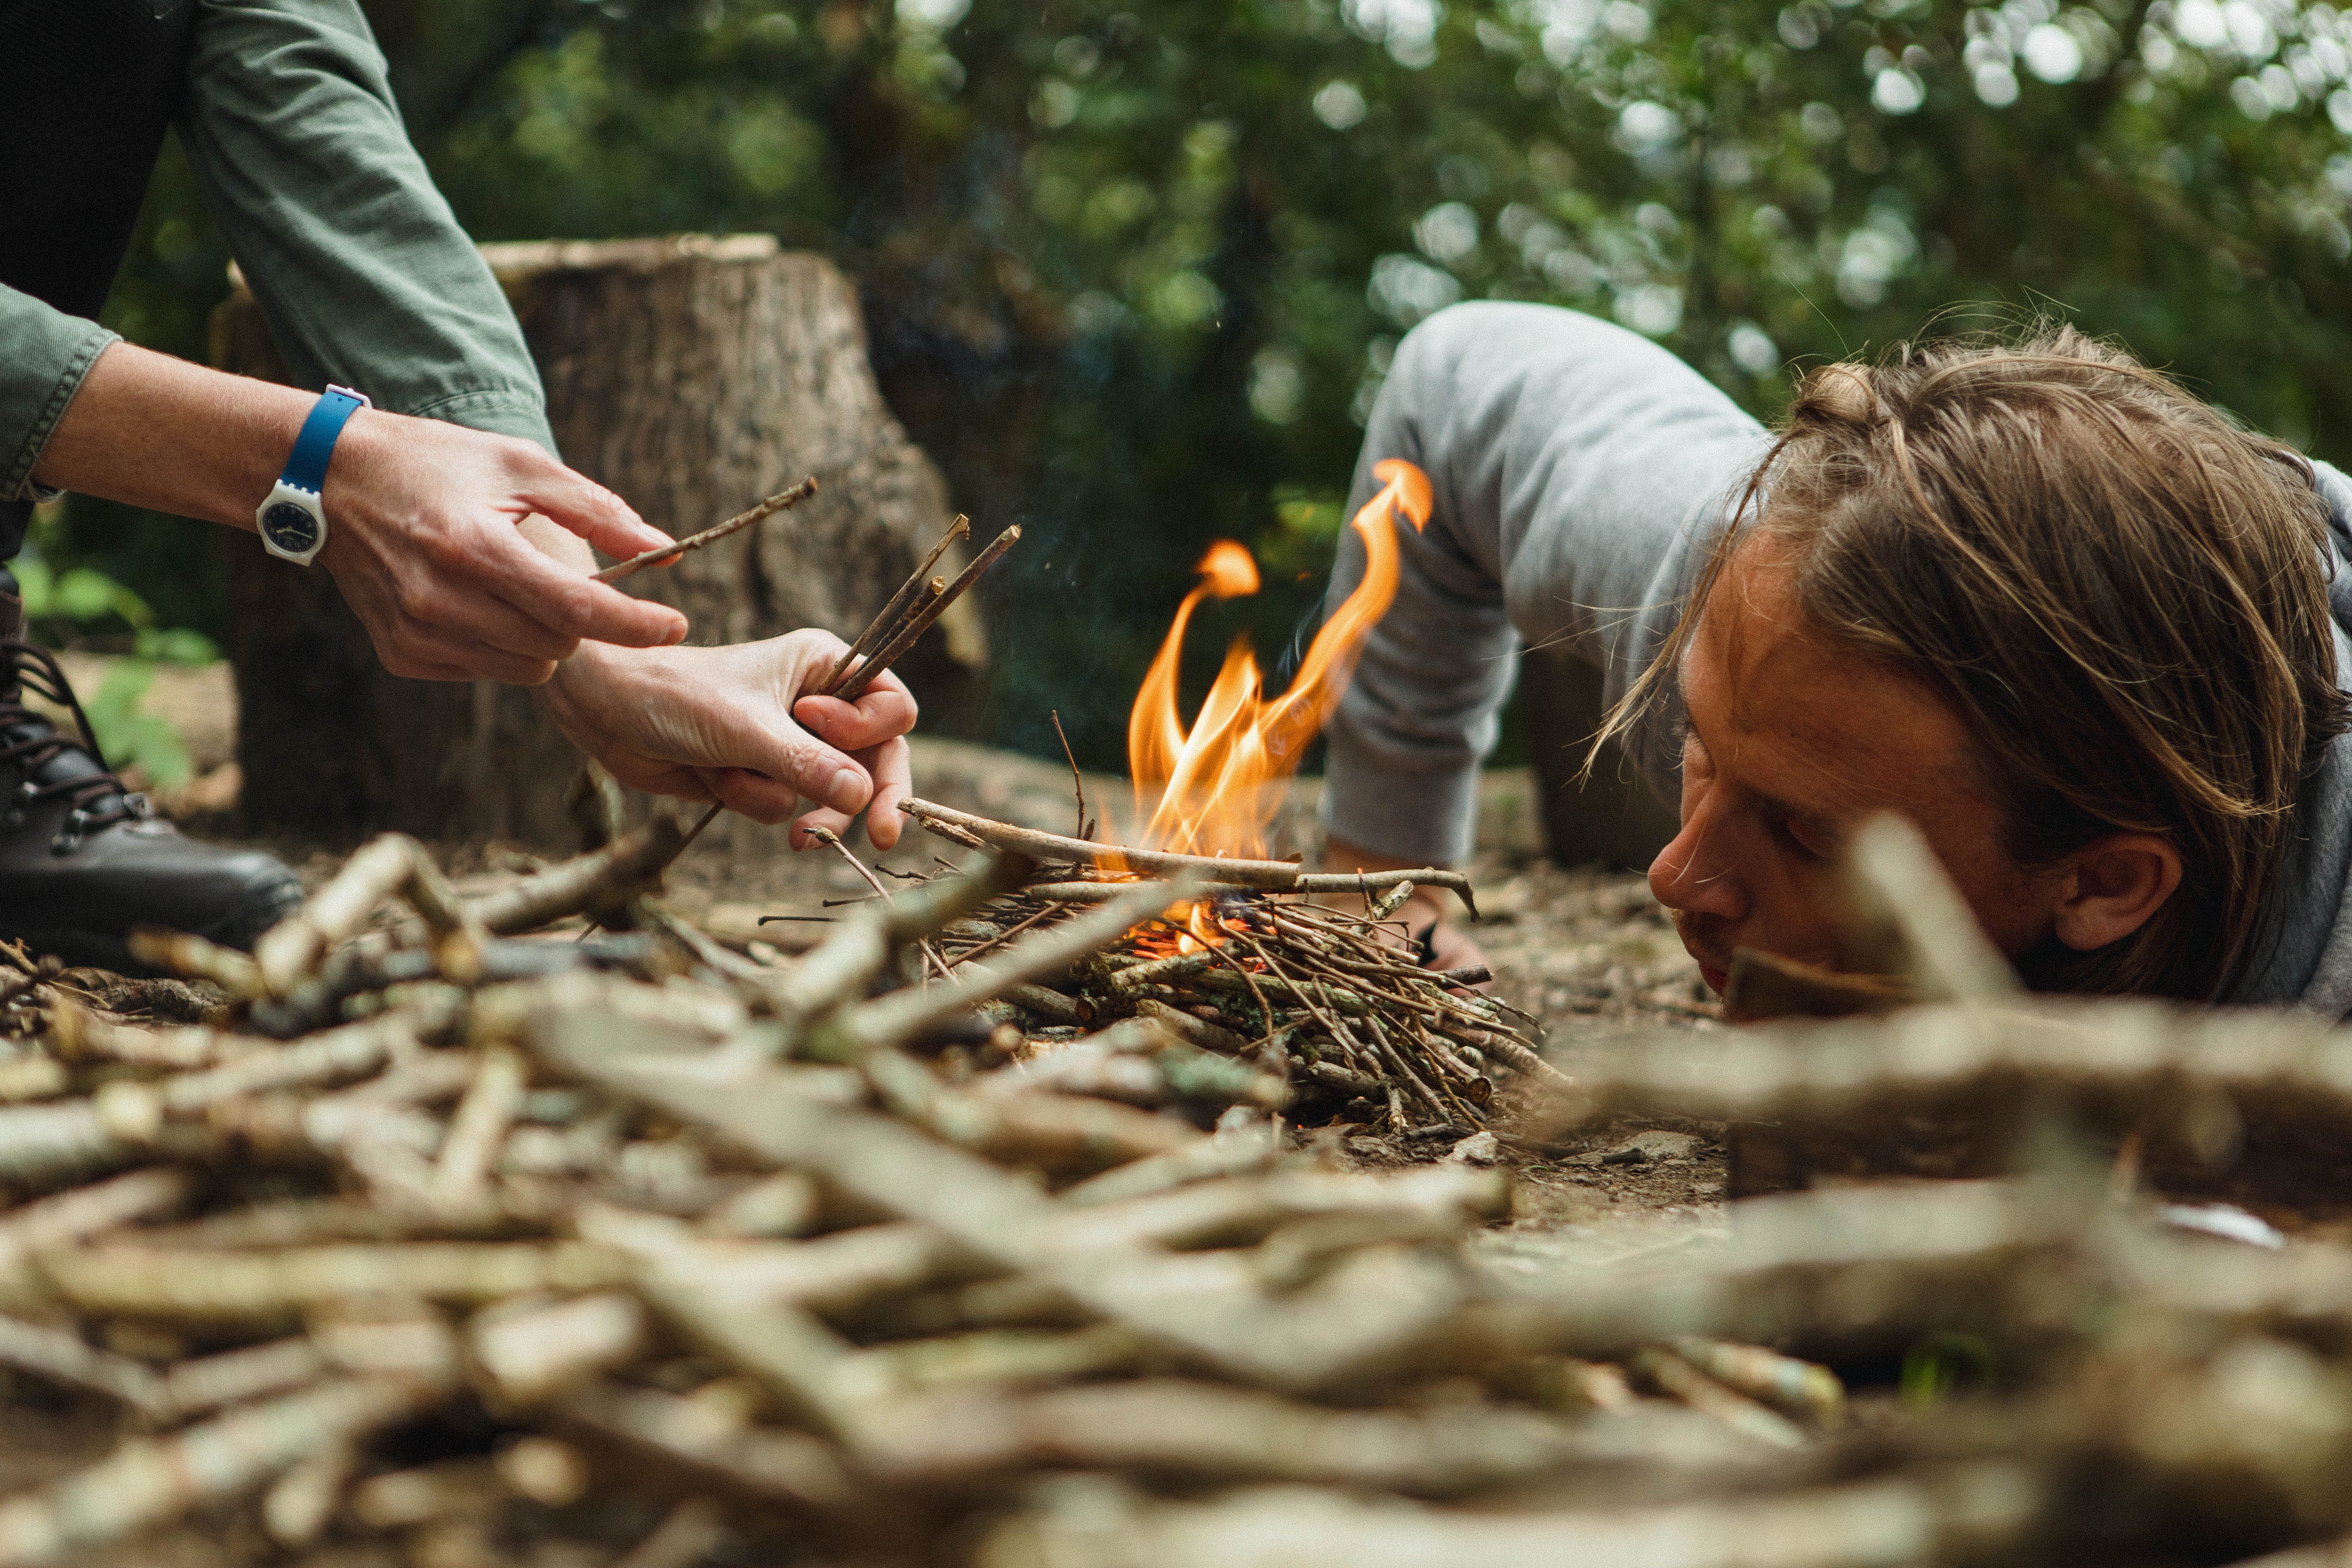 Participants learn the fundamentals of bushcraft